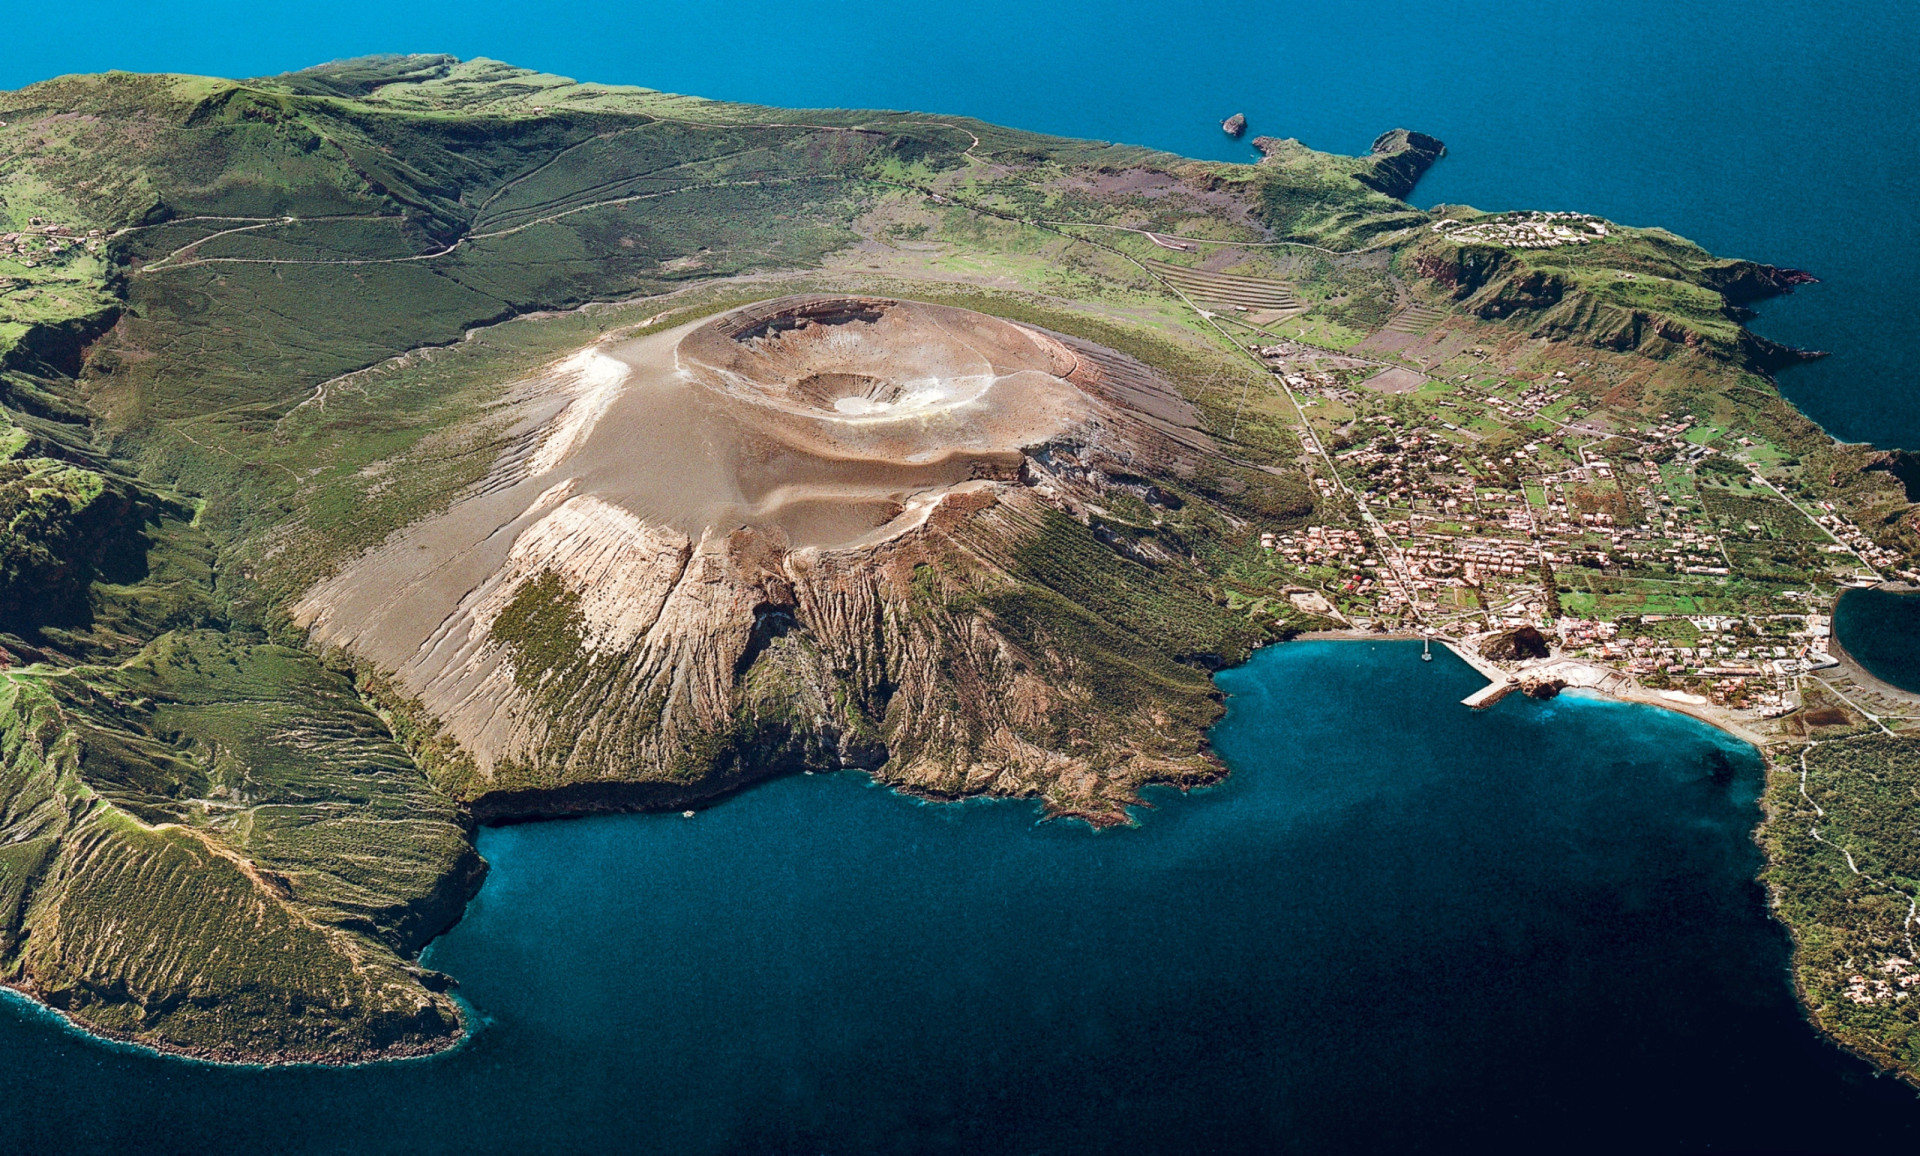 <p>The aptly named Vulcano Island is a small volcanic island also set in the Tyrrhenian Sea. The last major eruption took place in 1888. The island, however, is subject to regular volcanic activity, including dangerous gas emissions.</p><p>You may also like:<a href="https://www.starsinsider.com/n/217575?utm_source=msn.com&utm_medium=display&utm_campaign=referral_description&utm_content=701215en-us"> Celebrities with autism who are changing our perceptions</a></p>